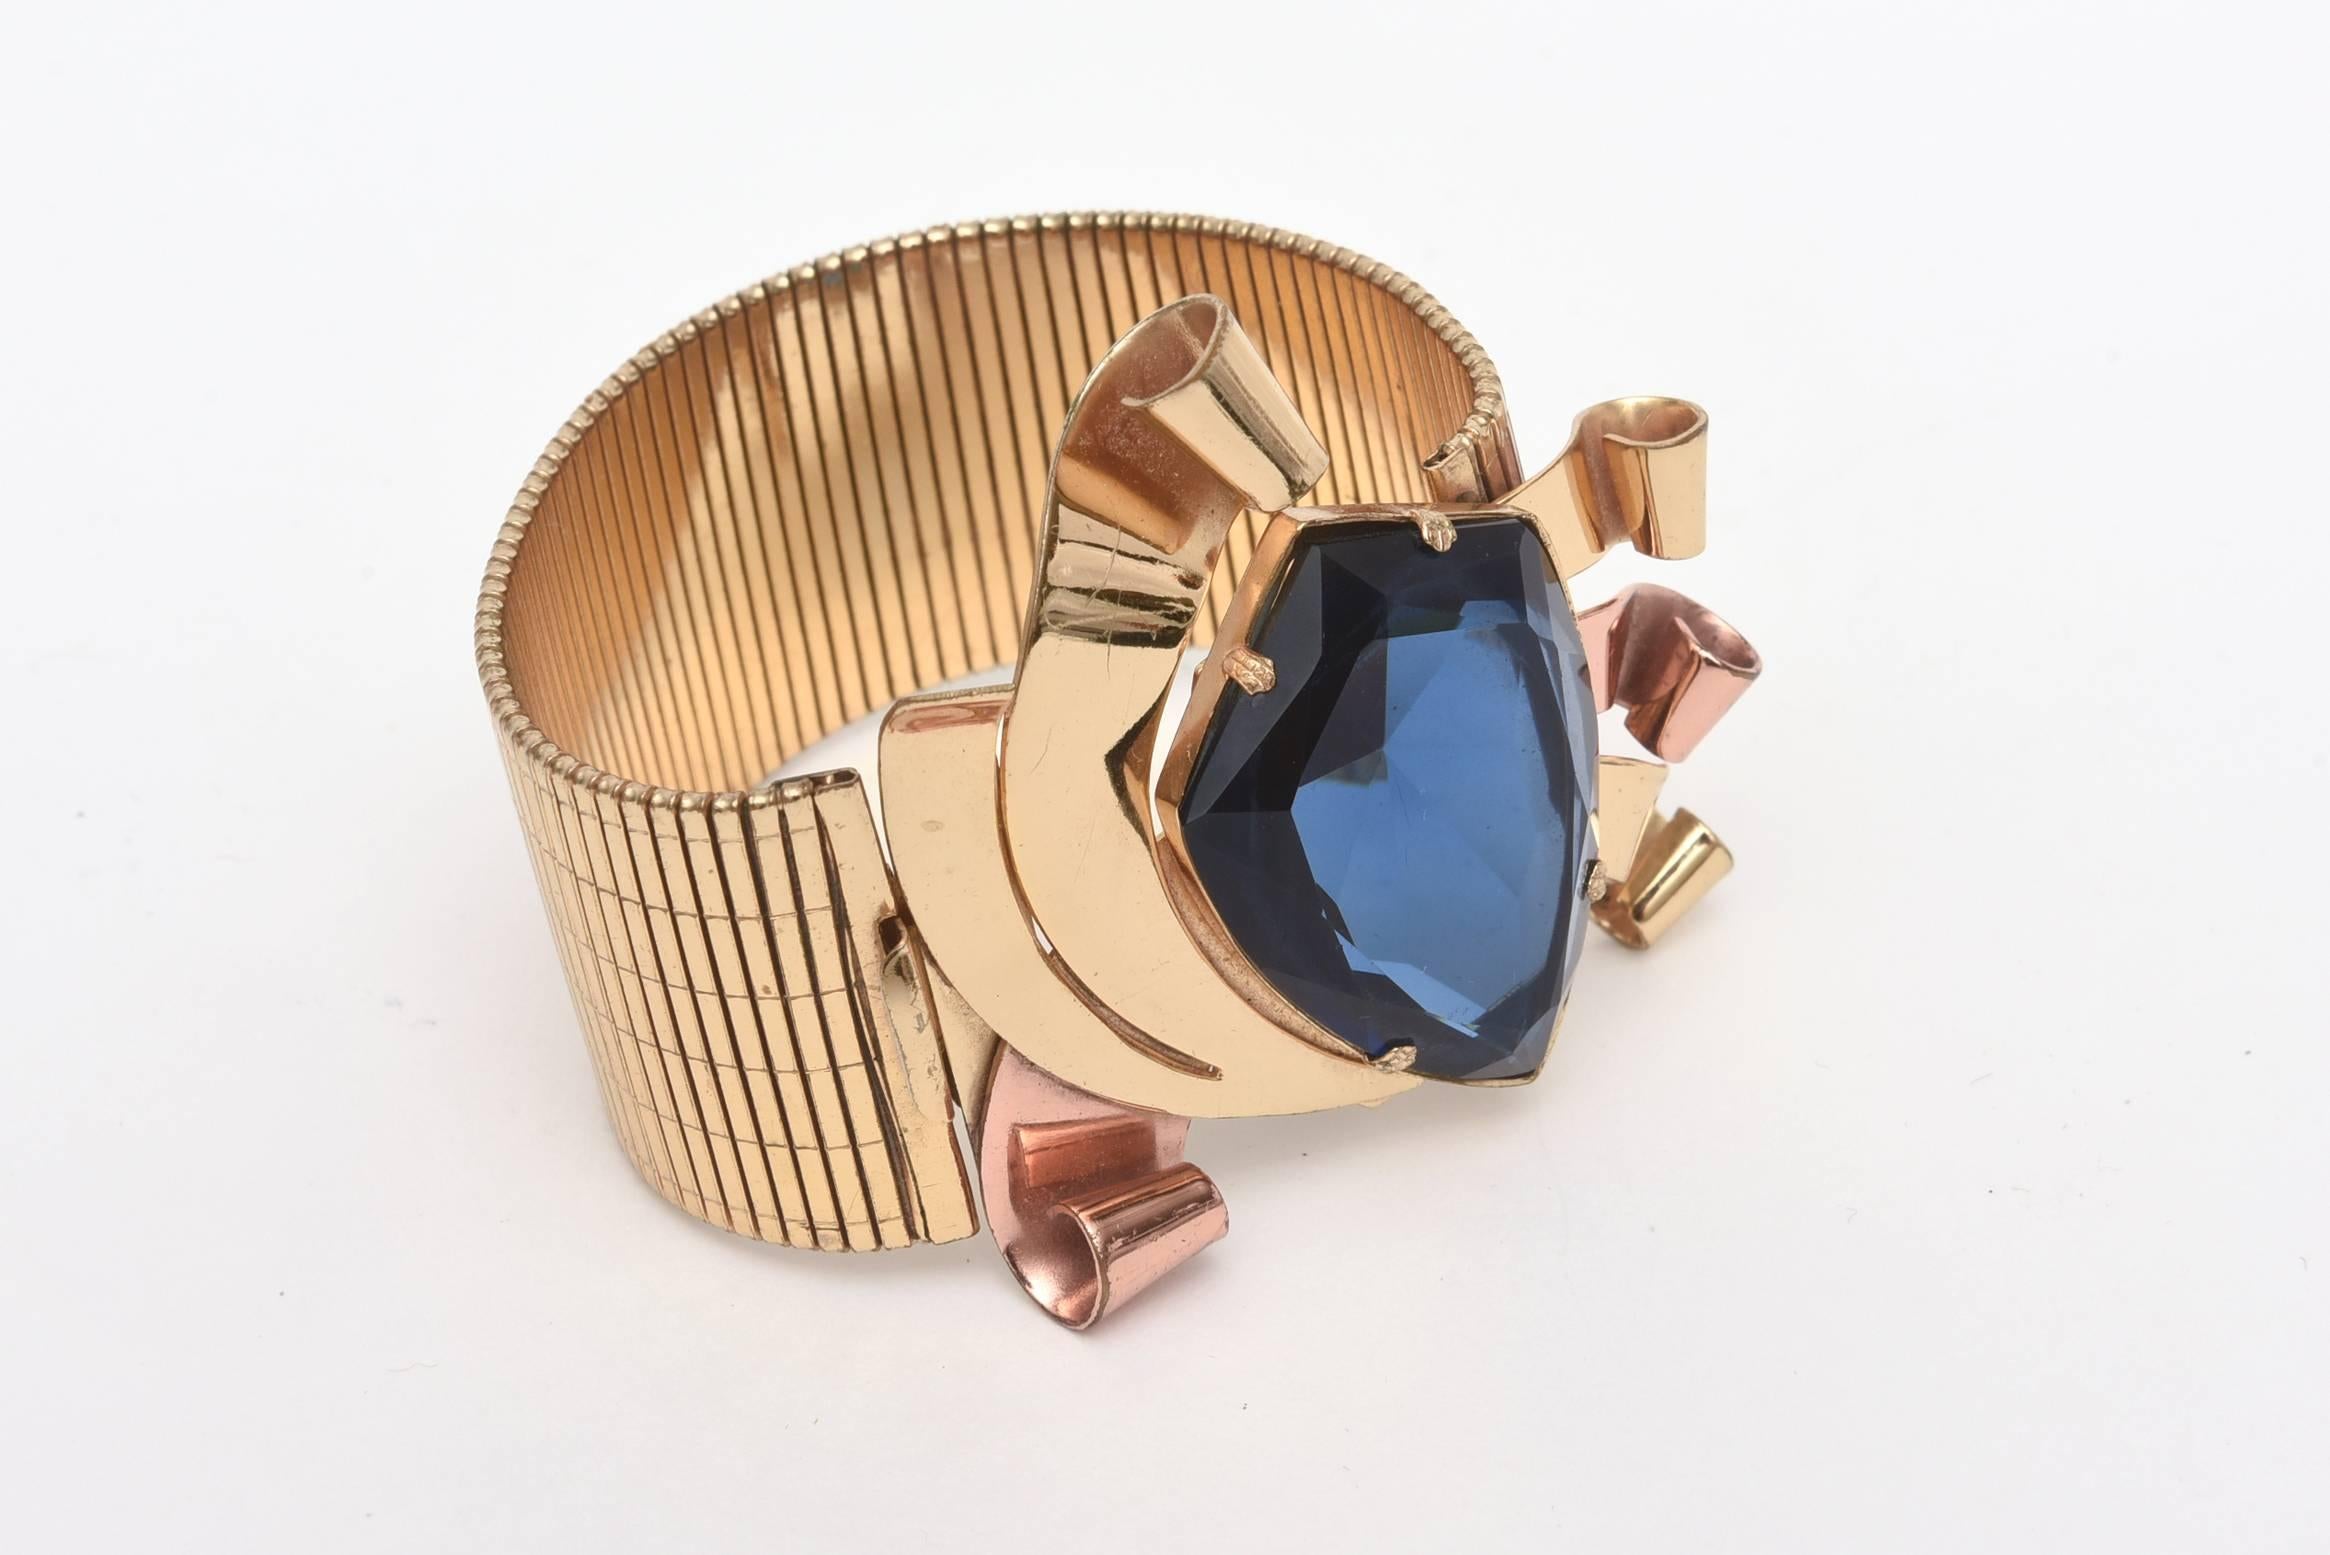 This fabulous retro cuff bracelet looks real! The brilliant blue faceted glass stone is vibrant and center stage. The combination of the two toned metals of ribbed gold plated and copper add to the theatrics of this unusual bracelet that is signed